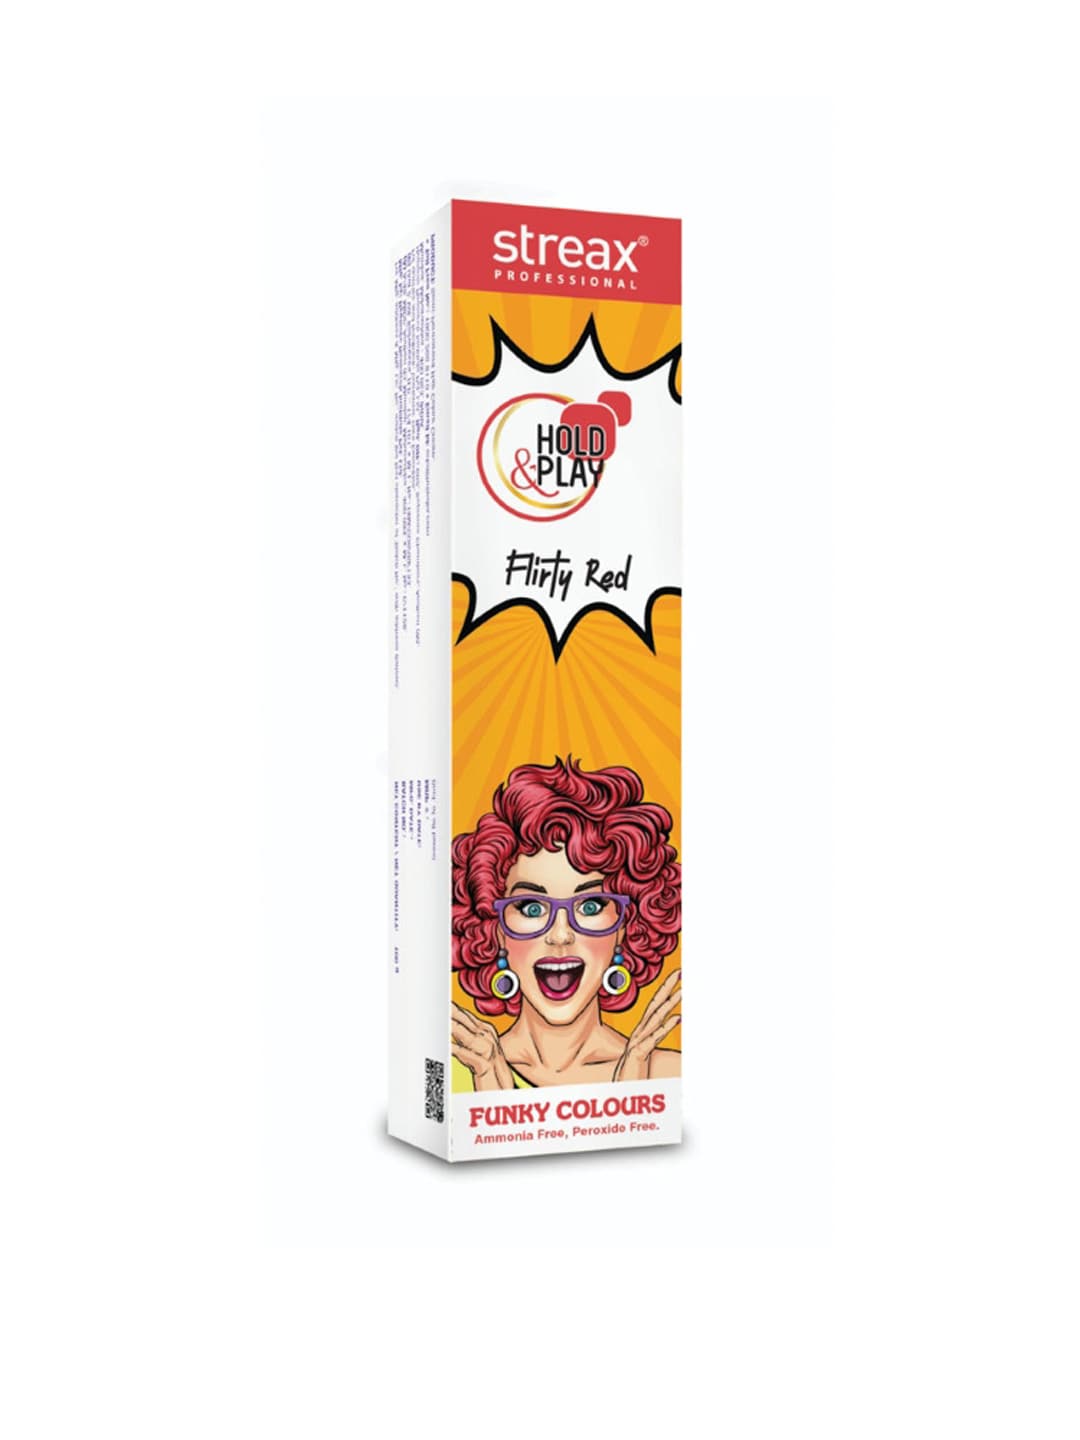 Streax Professional Hold & Play Funky Colours Flirty Red- 100 g Price in India